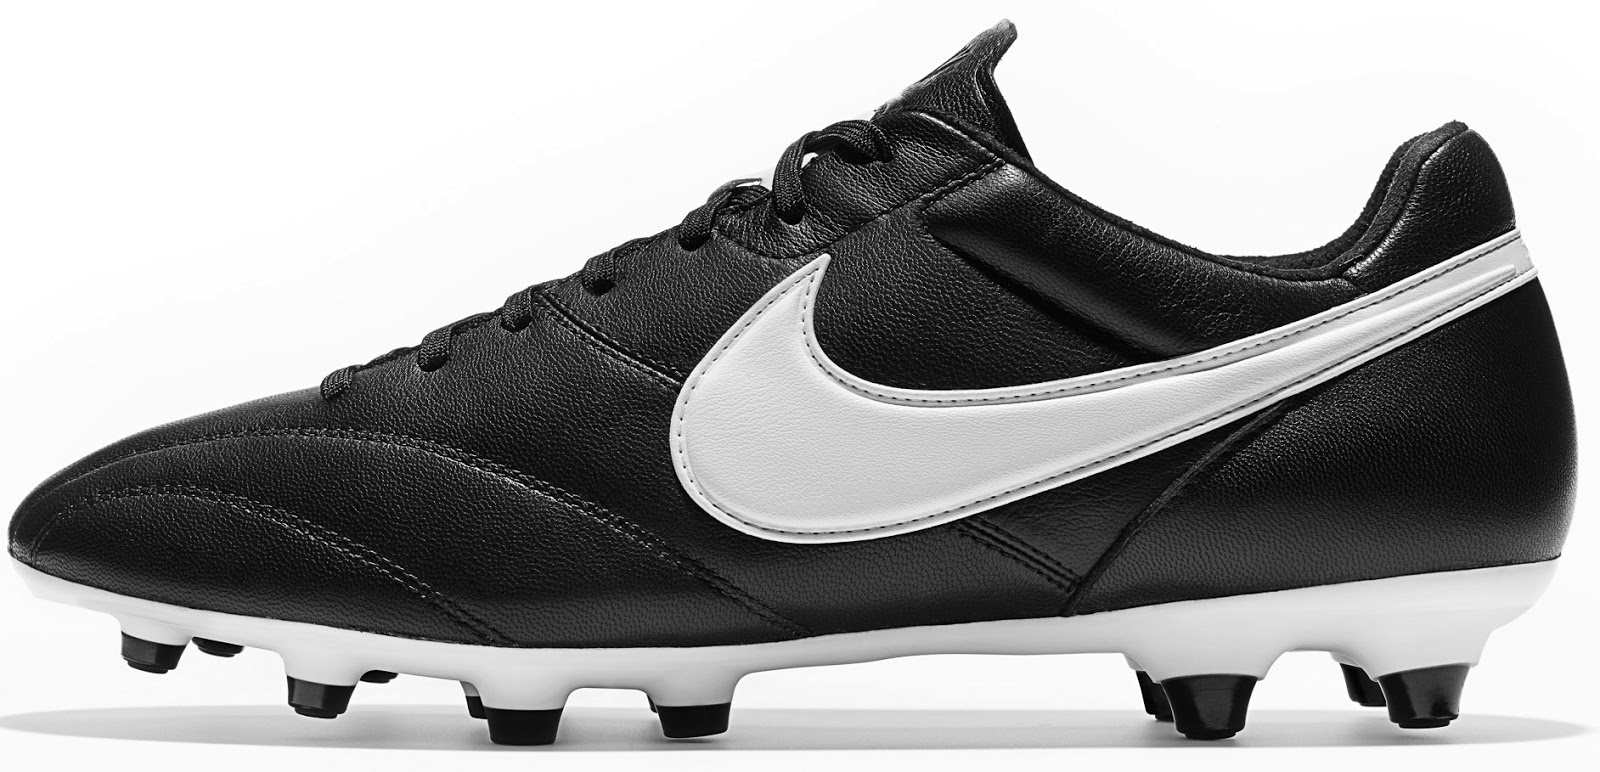 nike today released the nike premier boot the new nike premier boot    football boot calender